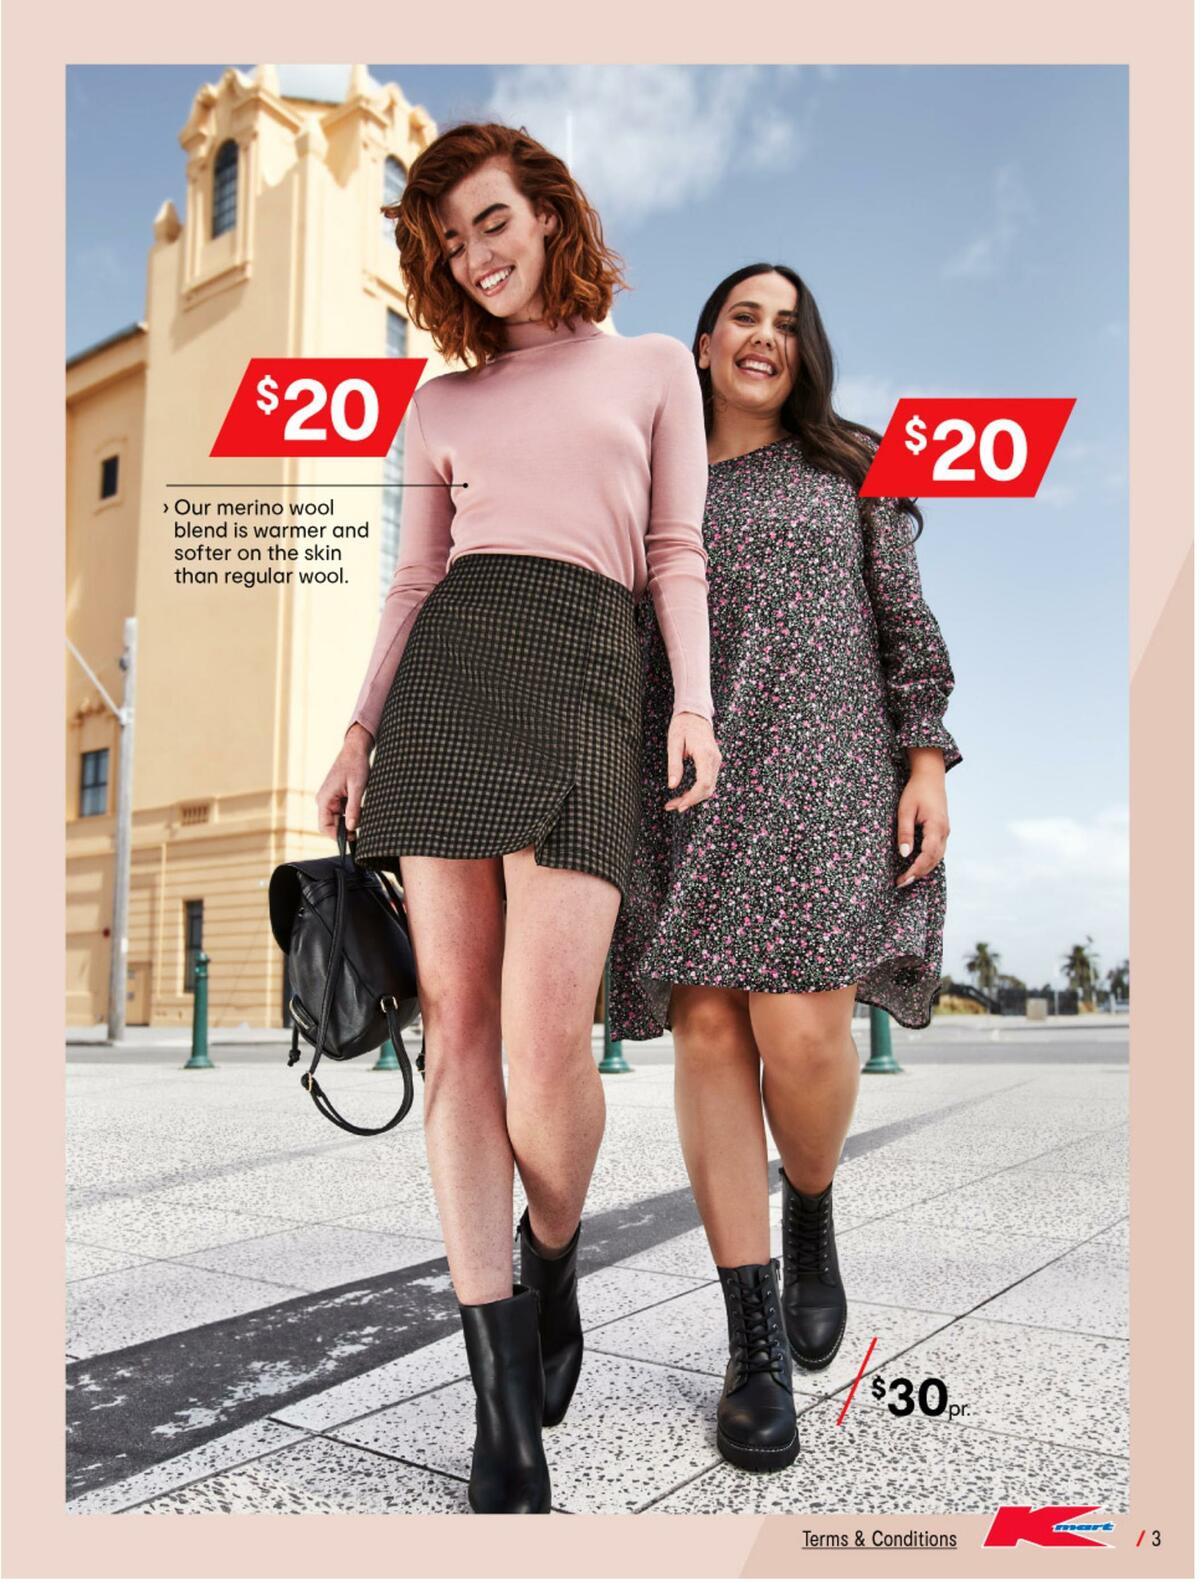 Kmart Catalogues from 21 April